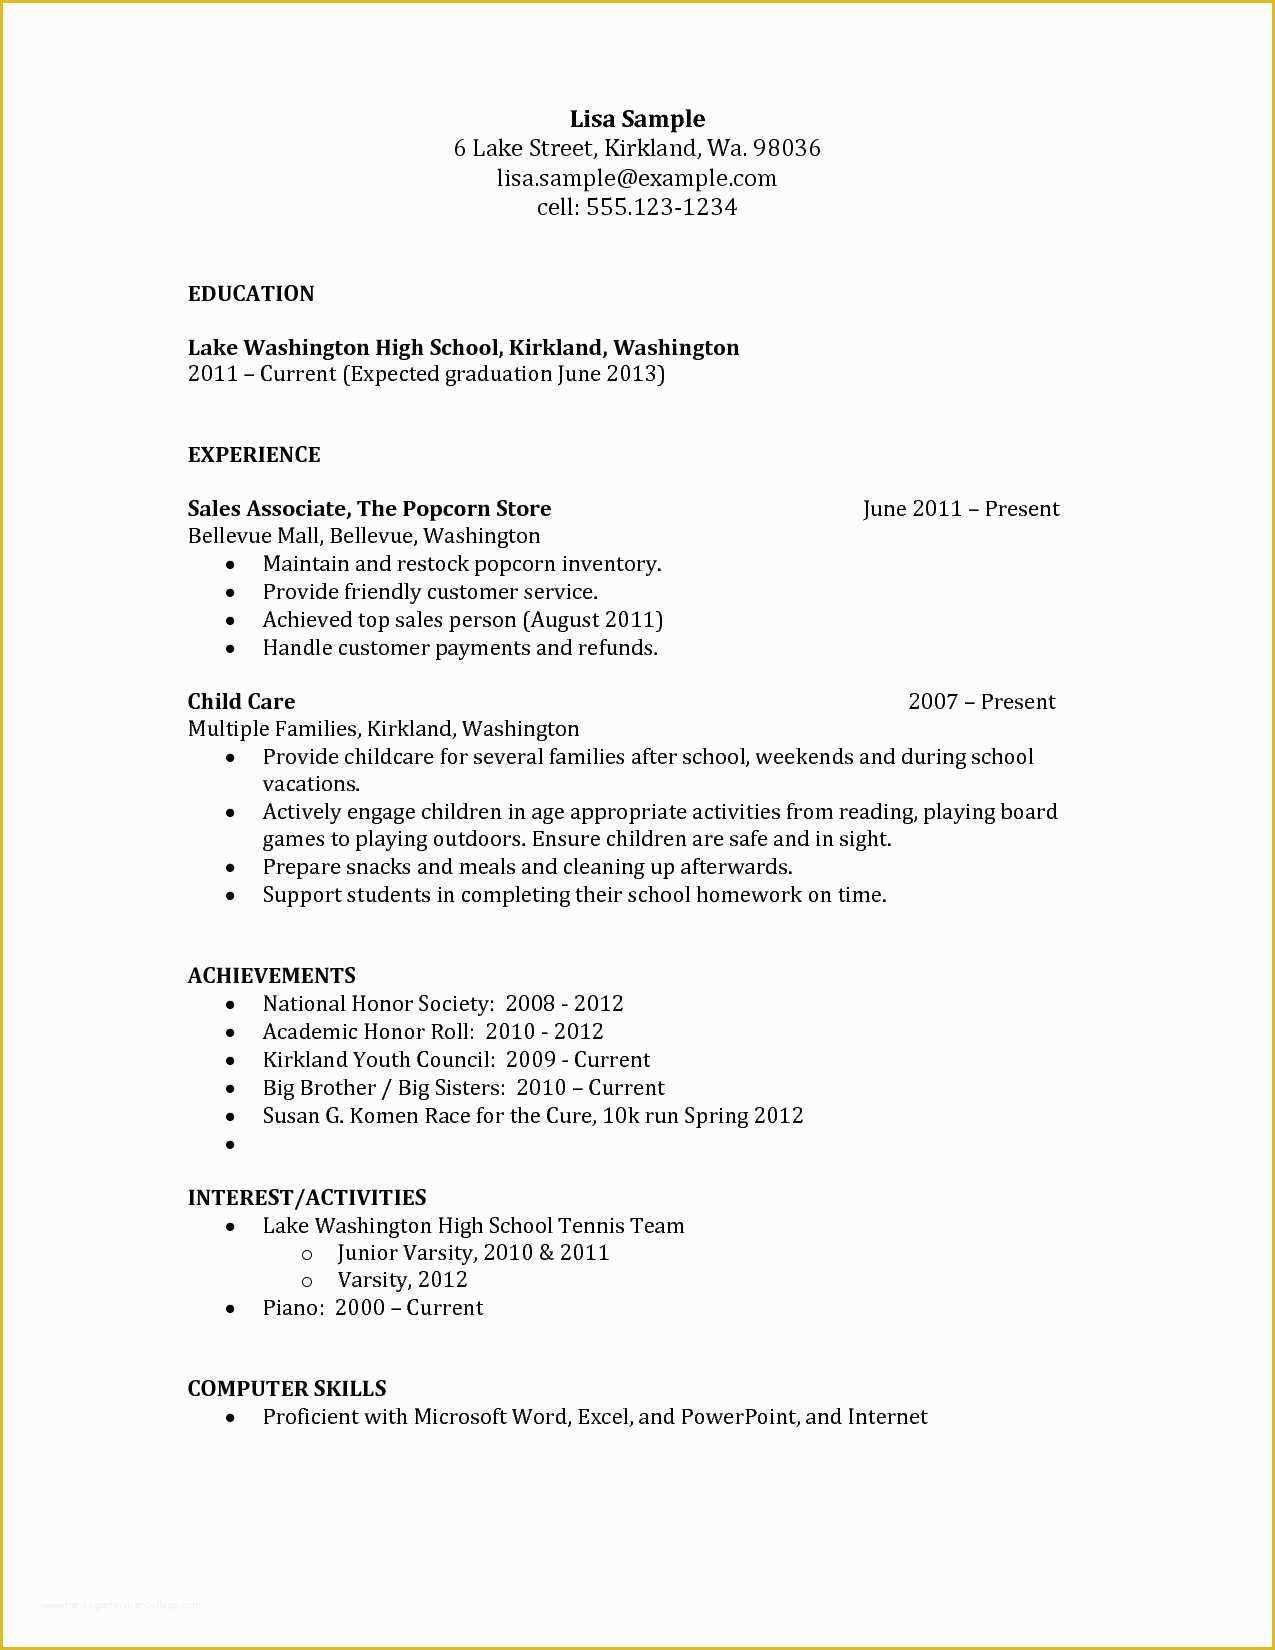 Free Resume Templates for Highschool Students with No Work Experience Of Free Resume Templates for Highschool Students with No Work